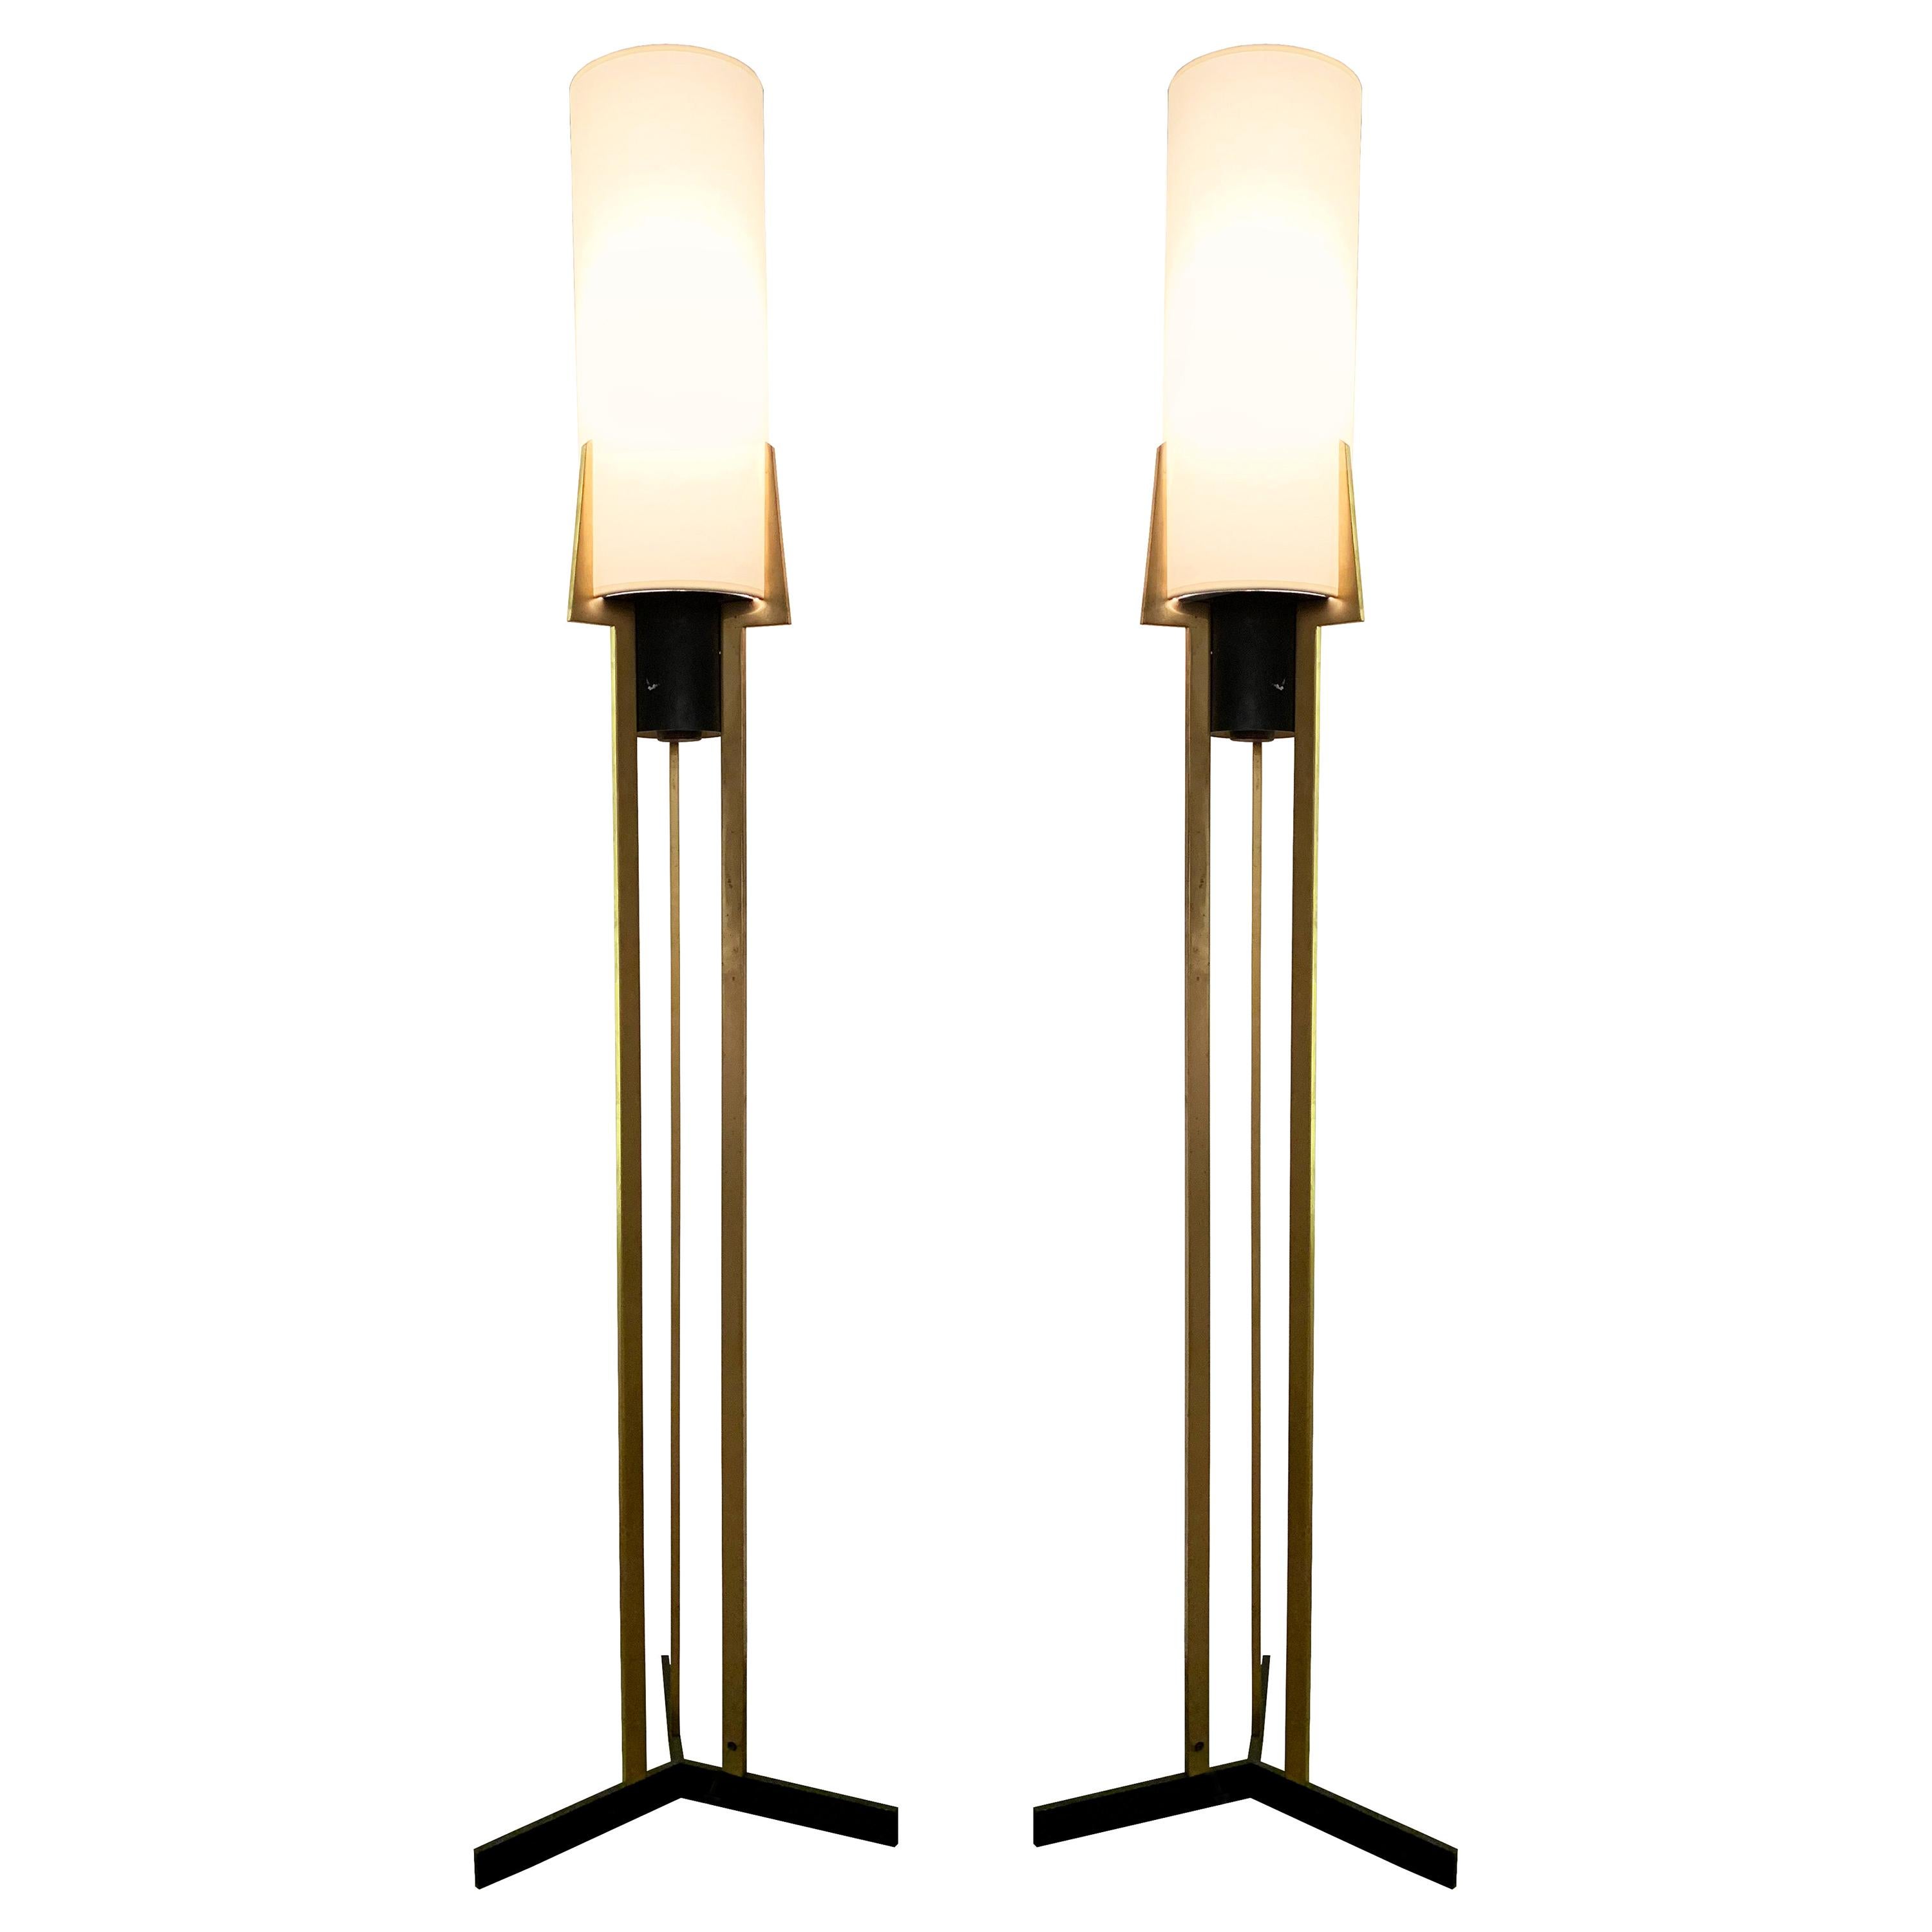 Pair of Floor Lamps by Maison Arlus 1950